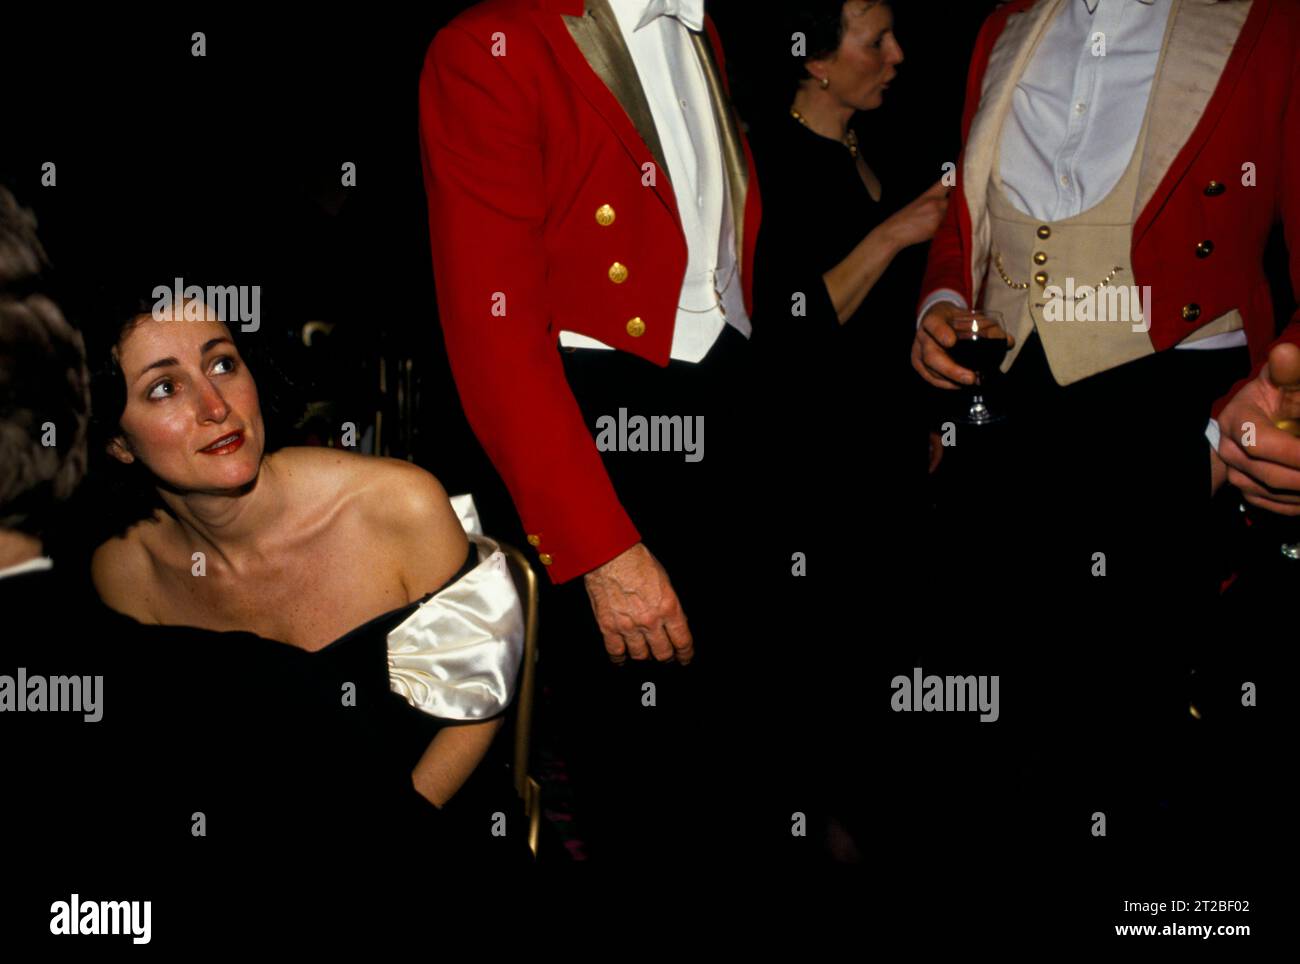 1980s Hunt Ball at Tysoe Manor, celebrates the end of the hunting season. A woman in an off the shoulder strapless black ball gown dress and two Masters of Foxhounds chatting wearing their traditional hunting pink evening formal attire.  Tysoe, Warwickshire, England April 1982. 1980s UK HOMER SYKES. Stock Photo